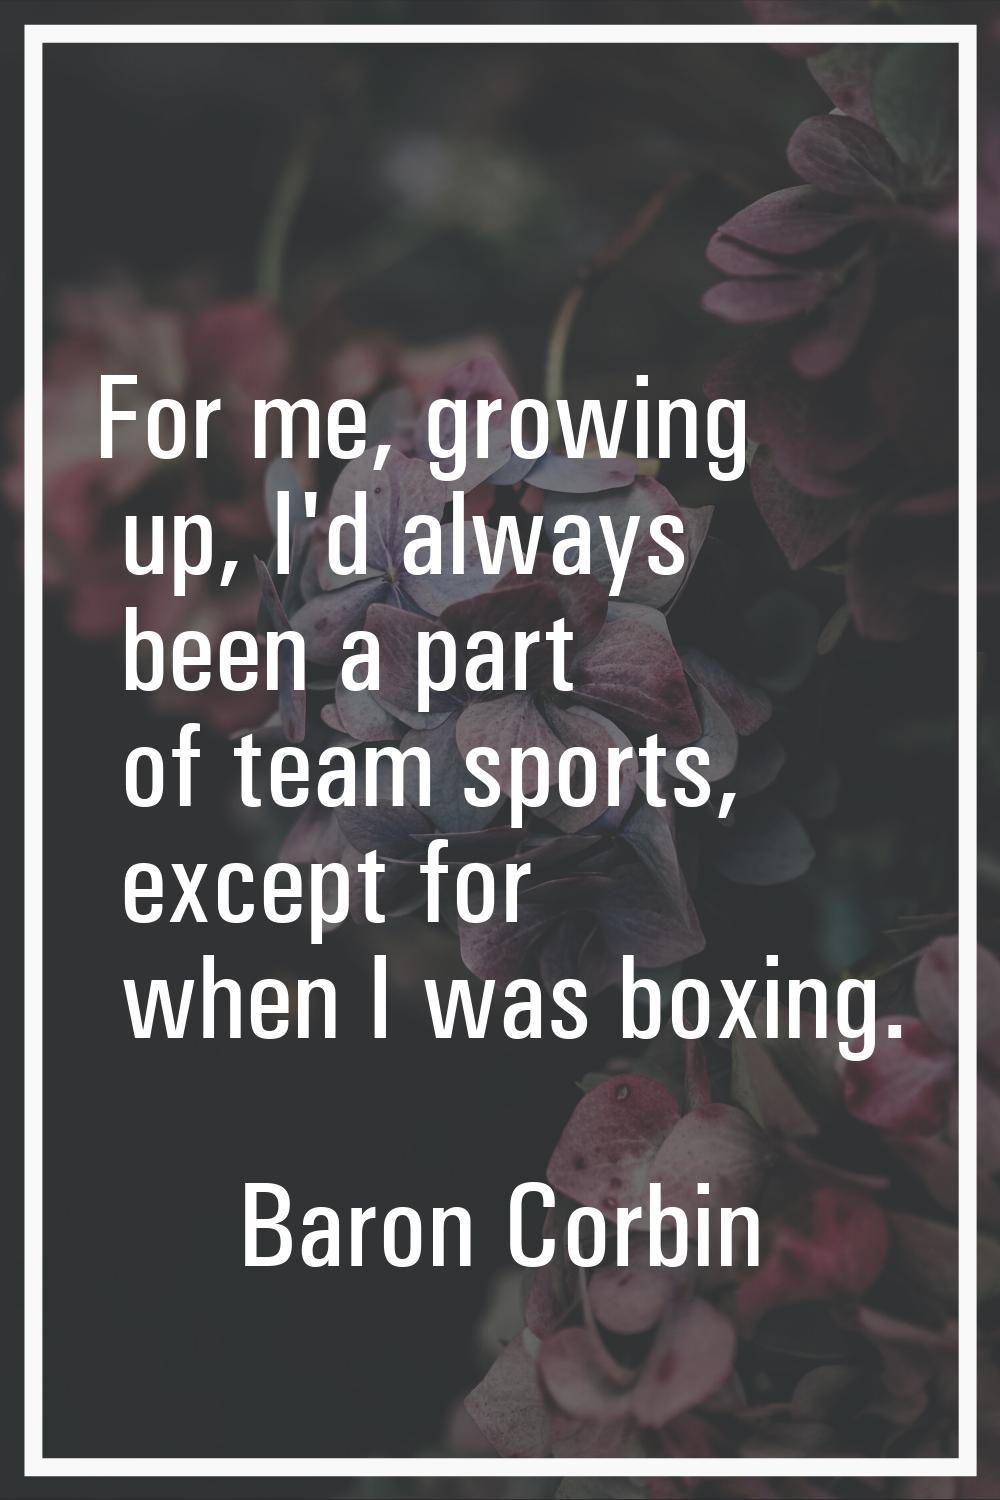 For me, growing up, I'd always been a part of team sports, except for when I was boxing.